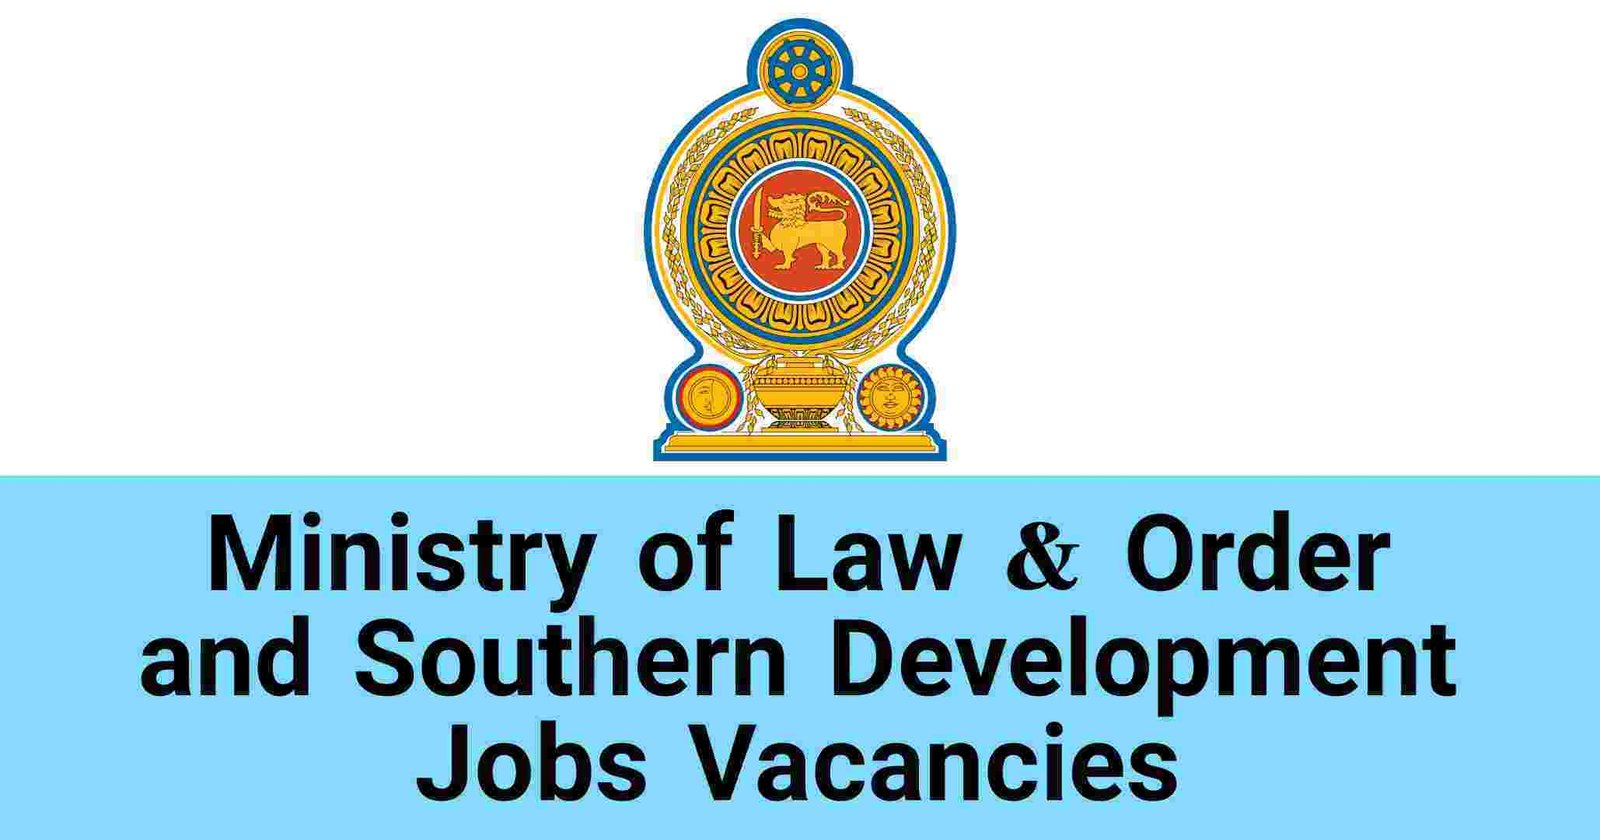 Ministry of Law & Order and Southern Development Jobs Vacancies